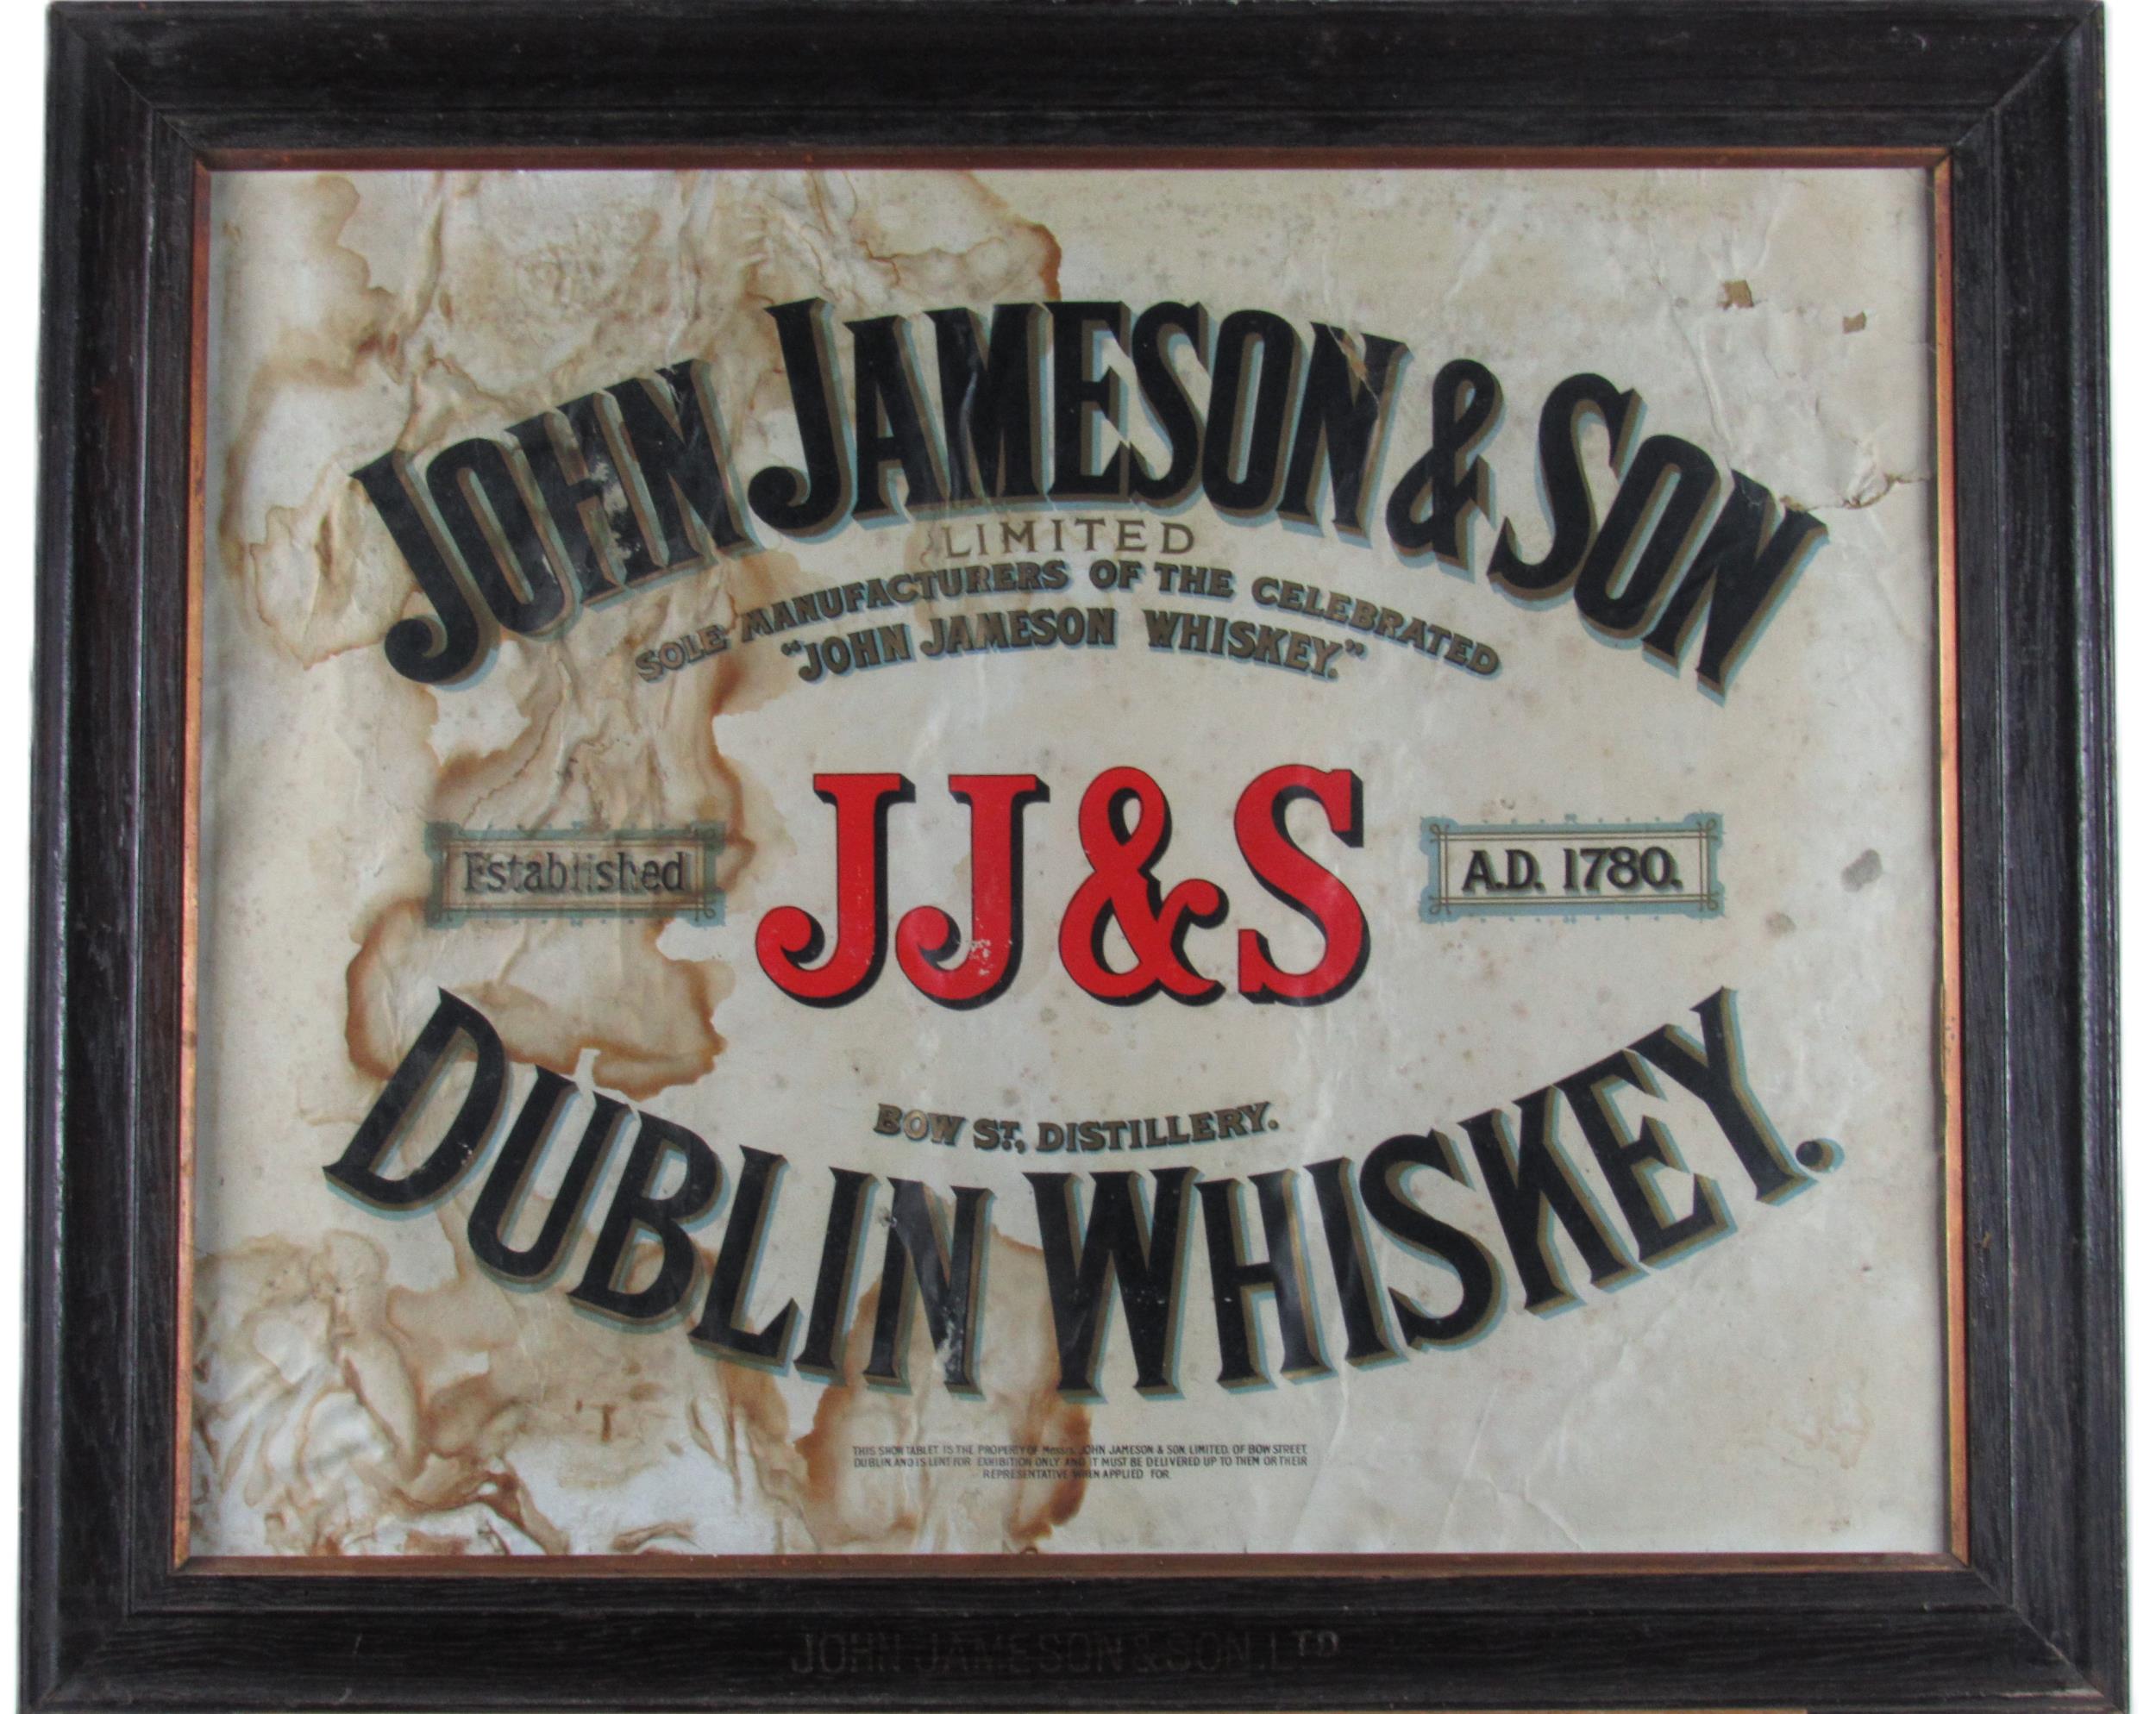 An original printed Advertisement landscape Print Poster, for "John Jameson & Sons Limited - Sole